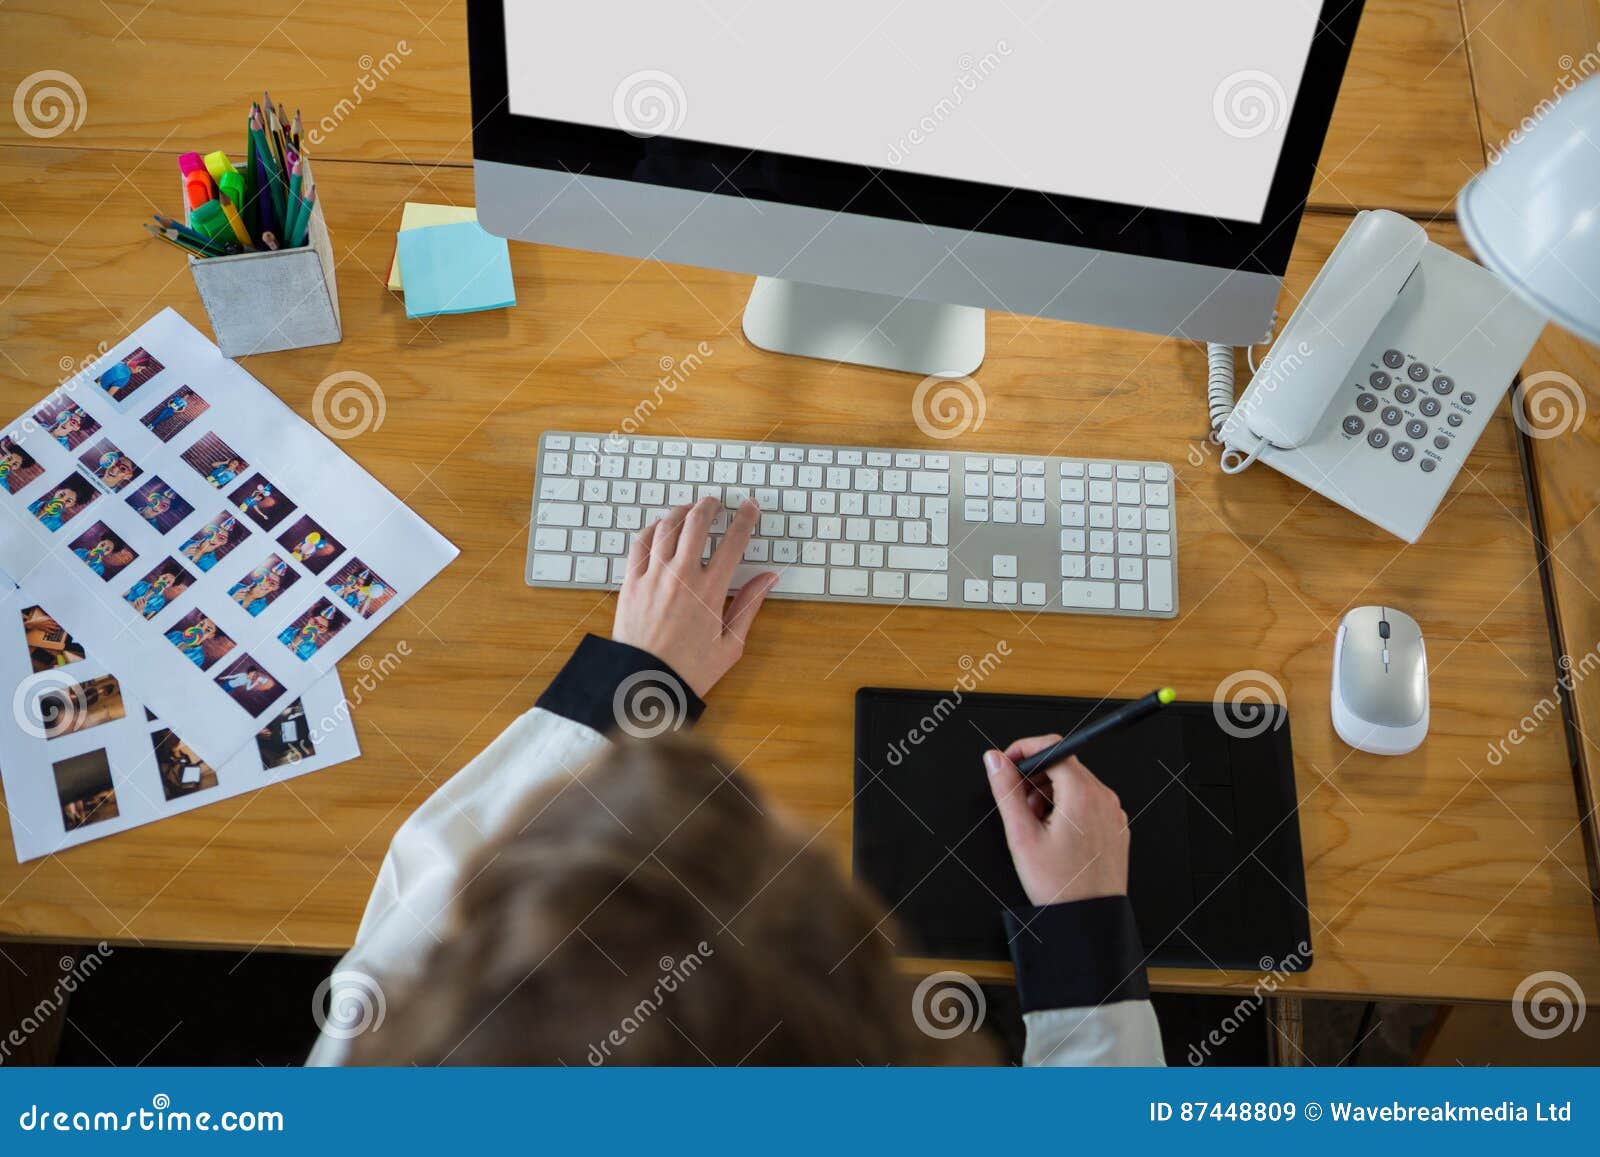 Graphic Designer Using Desktop Pc And Graphic Tablet Stock Image Image Of Desk Checkup 87448809,What Do Graphic Designers Make